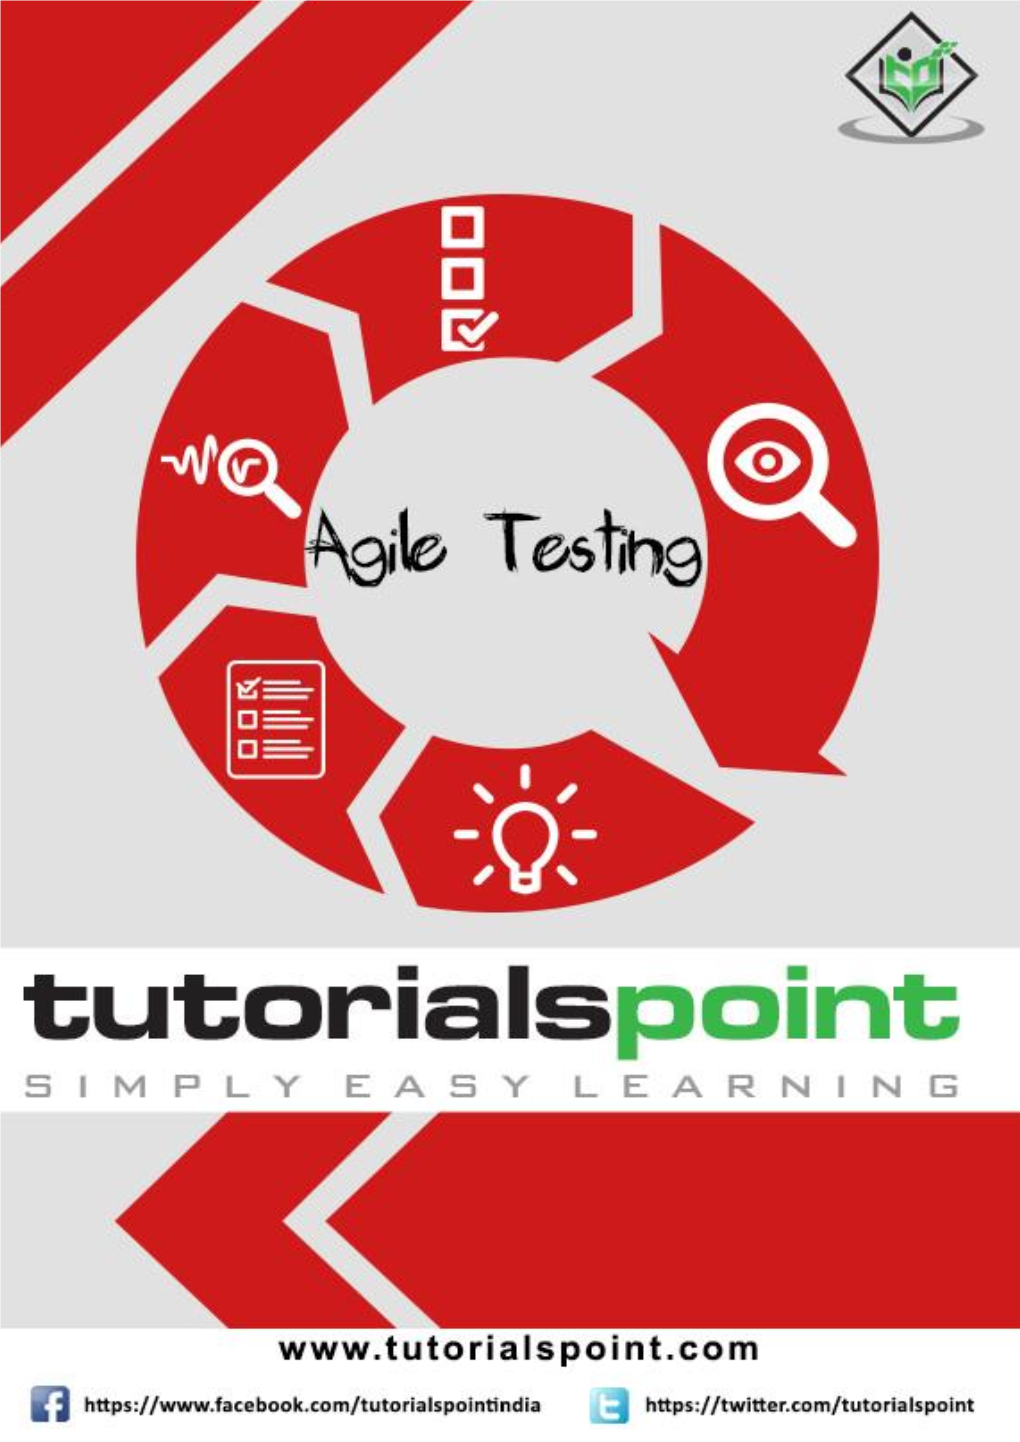 What Is Agile Testing?